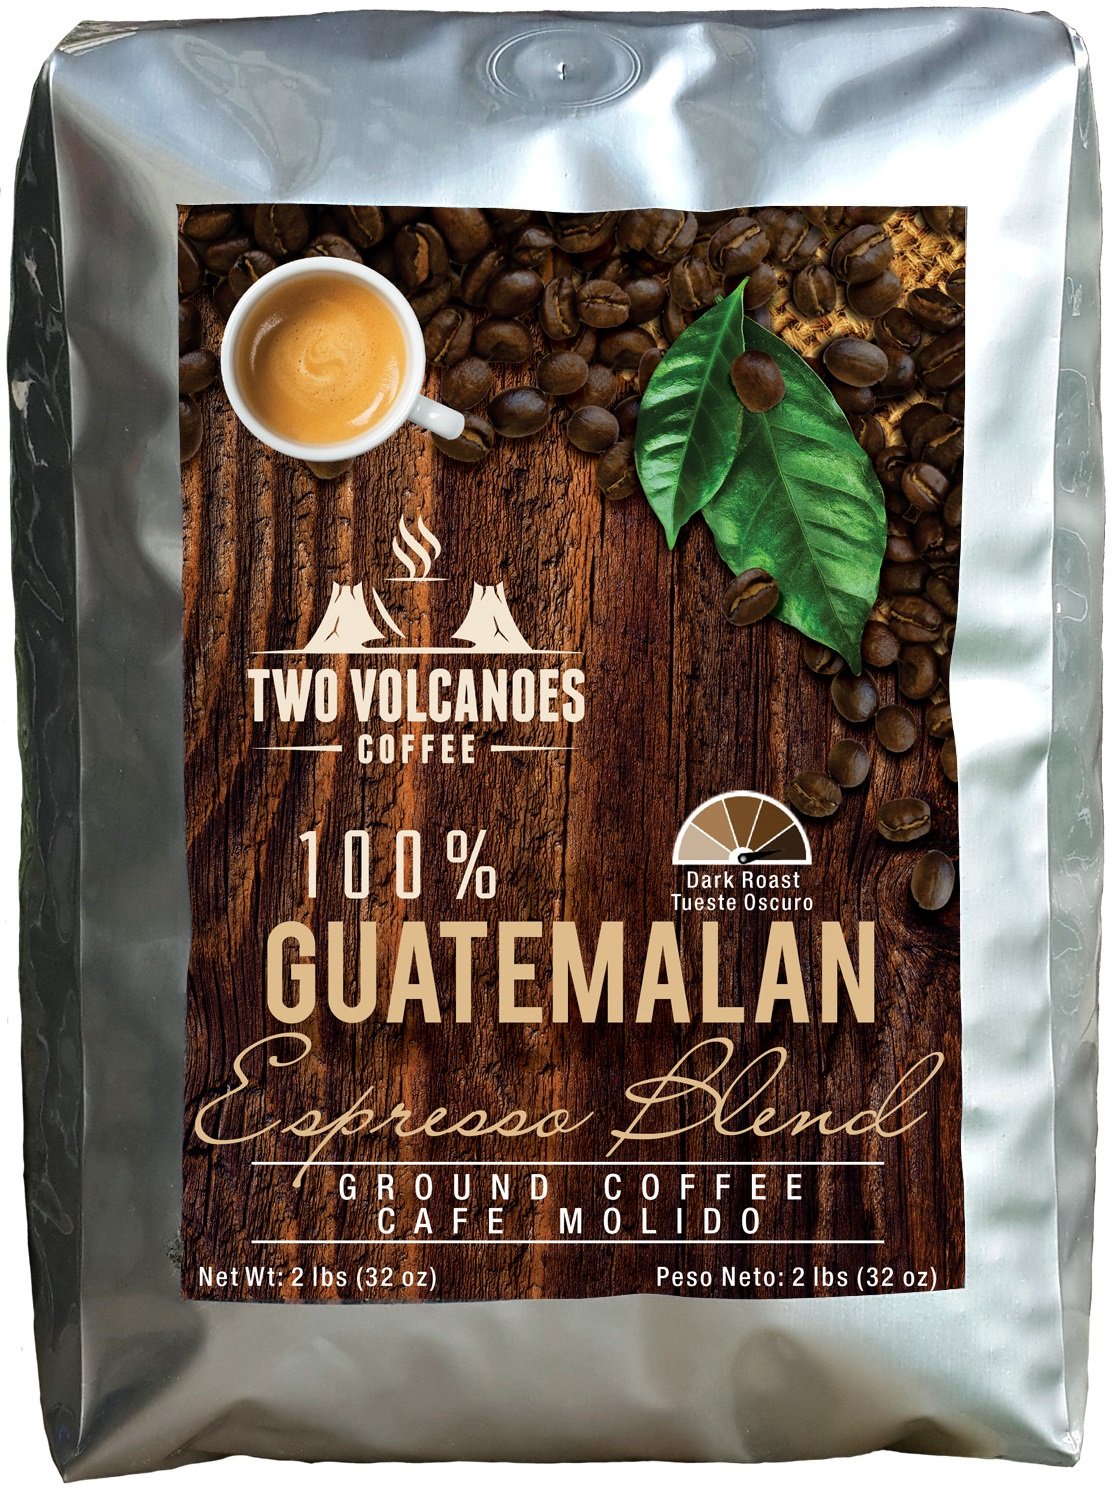 Two Volcanoes Ground Coffee - Dark Roast Espresso Blend - bag - Guatemala Delicious Gourmet Coffee. Great for French Press. Get The Kick, Enjoy The Smoothness!